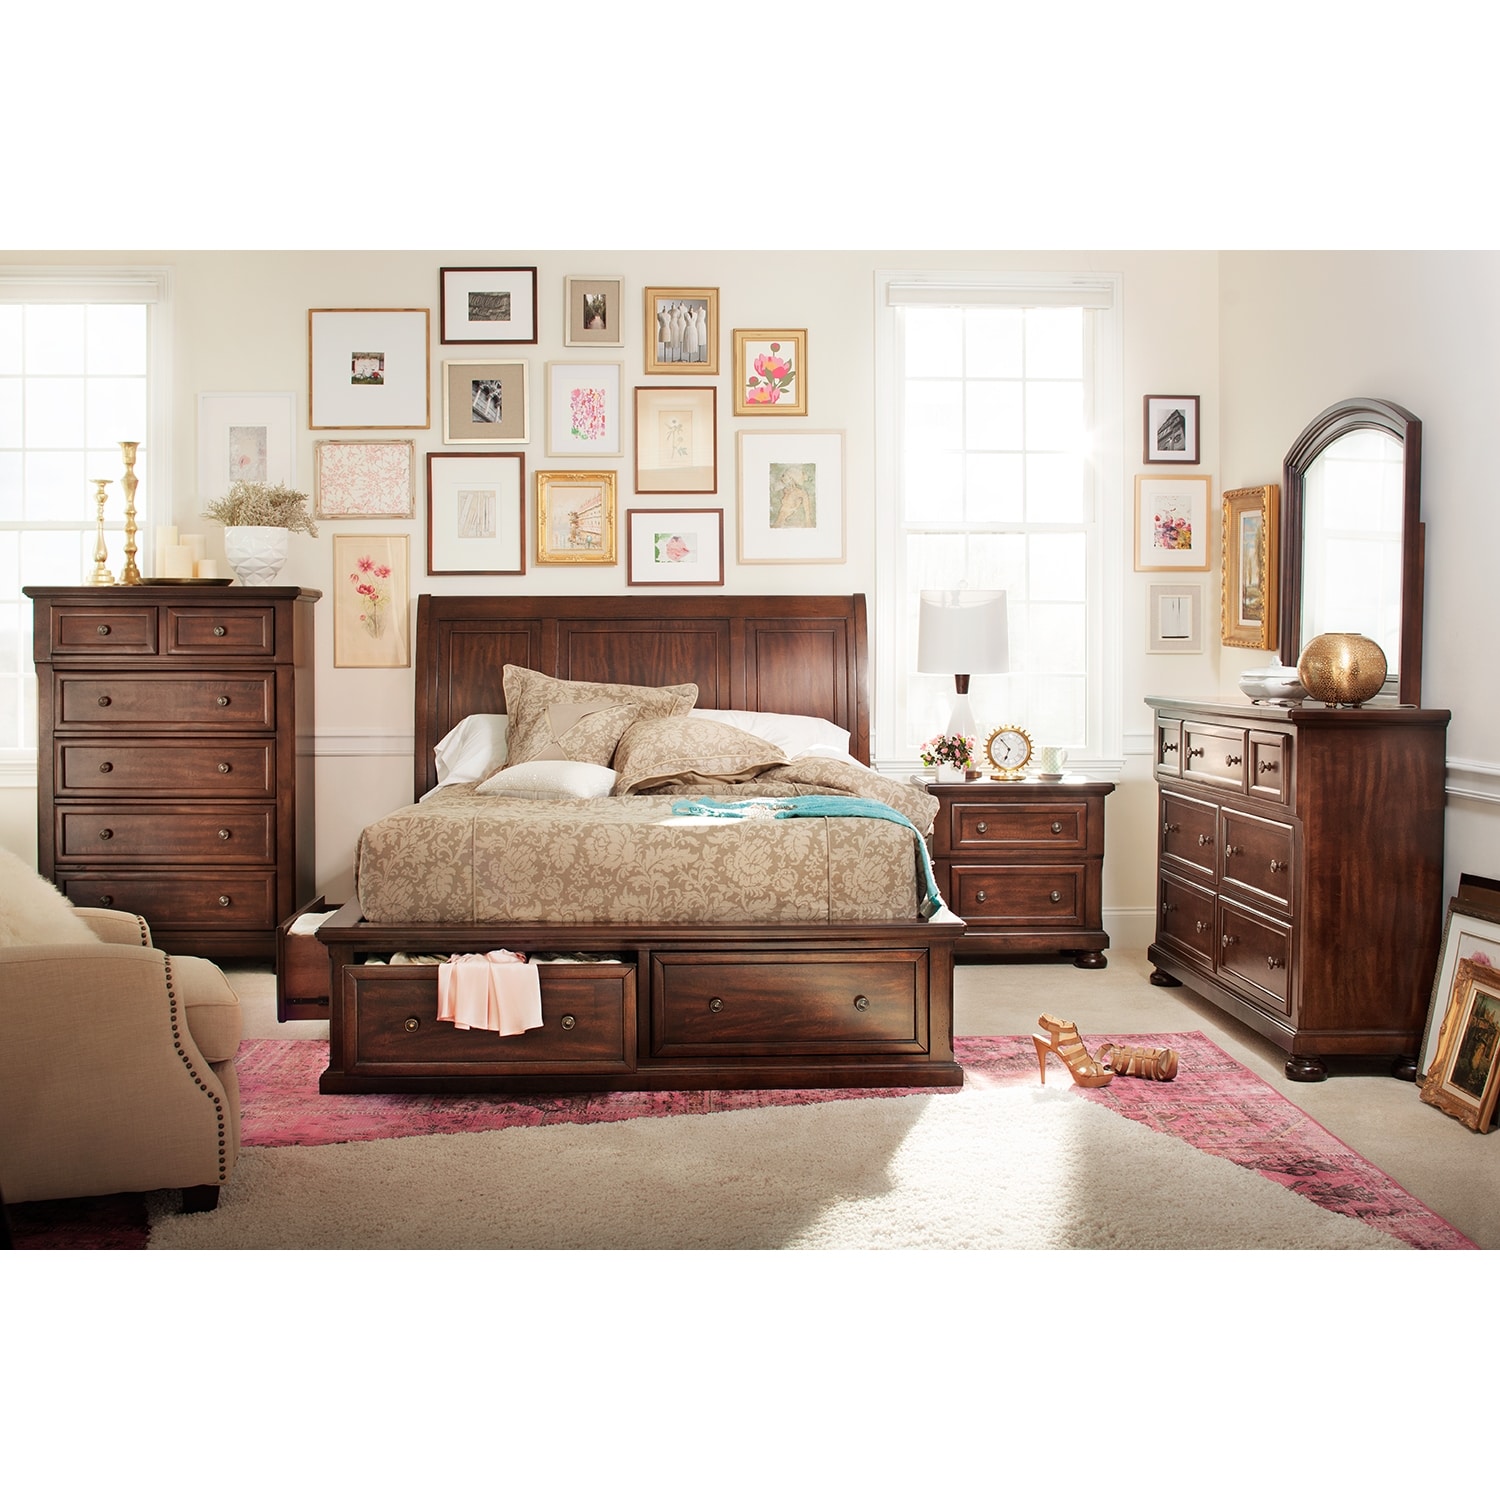 Hanover 7-Piece Queen Storage Bedroom Set - Cherry | Value City Furniture and Mattresses